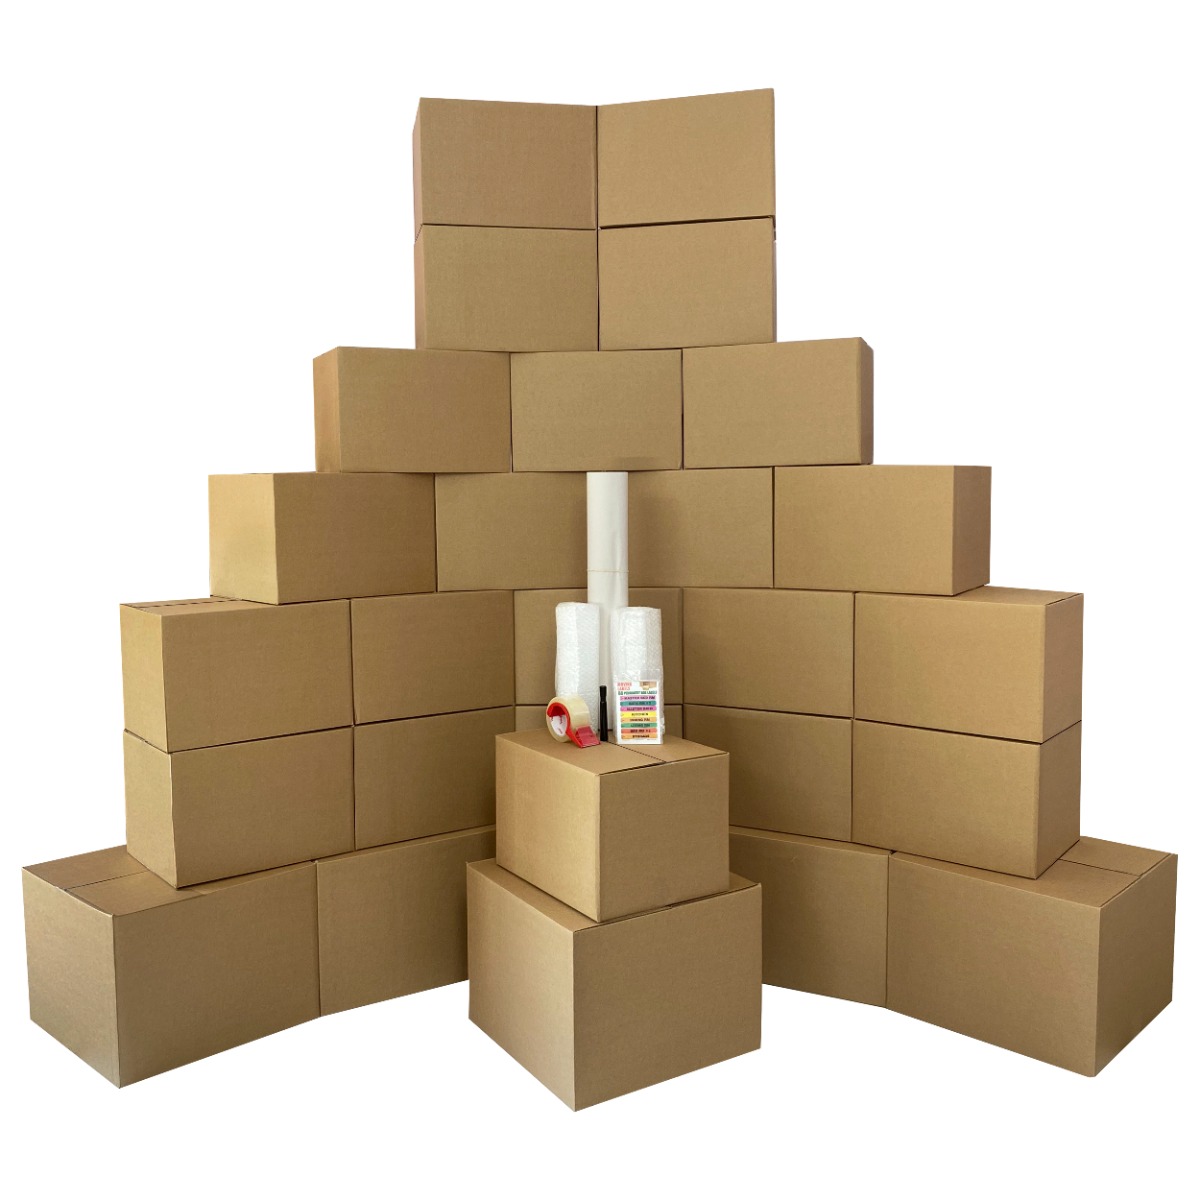 Uboxes Moving Boxes - 2 Room Bigger Smart Moving Kit - 28 Boxes,Tape, More